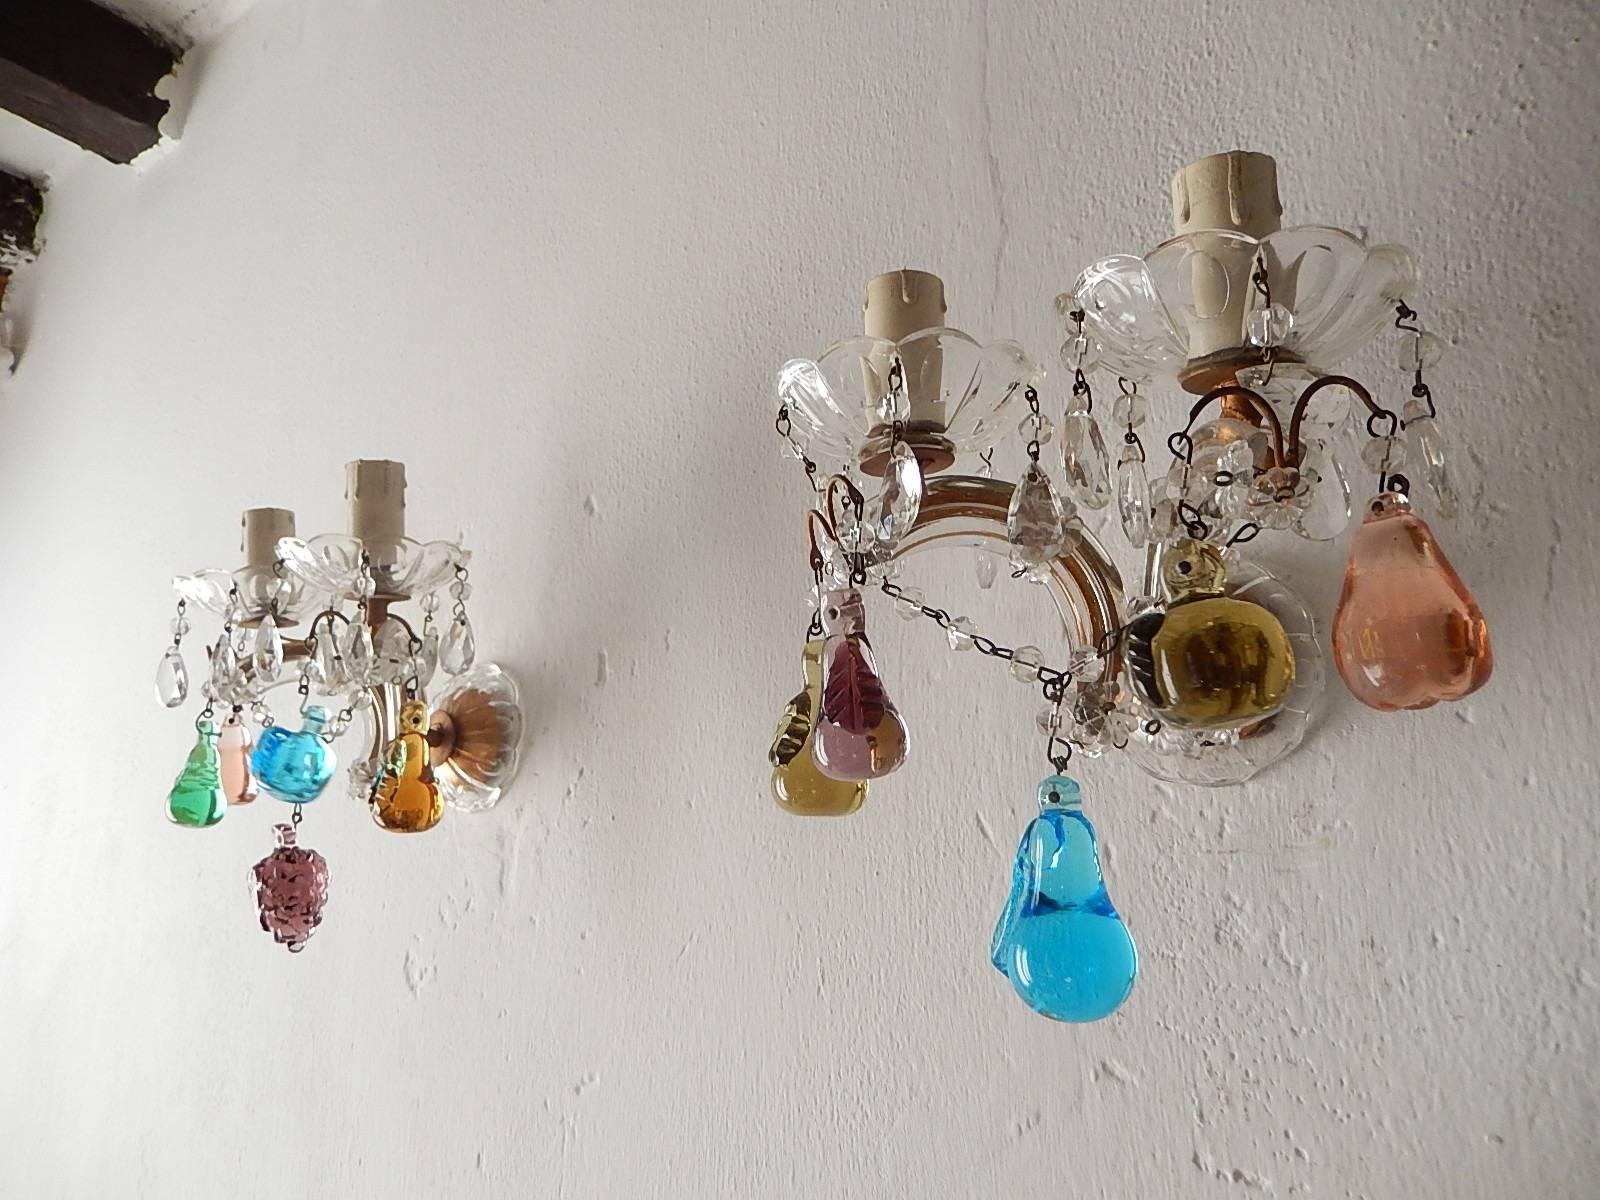 Housing 2 lights each, sitting in crystal bobeches, dripping with vintage crystals.  Gilt metal covered with Murano glass.  Adorning 5 Murano fruits on each.  Back plate is also a crystal bobeche.  Re-wired and ready to hang.  Free priority shipping